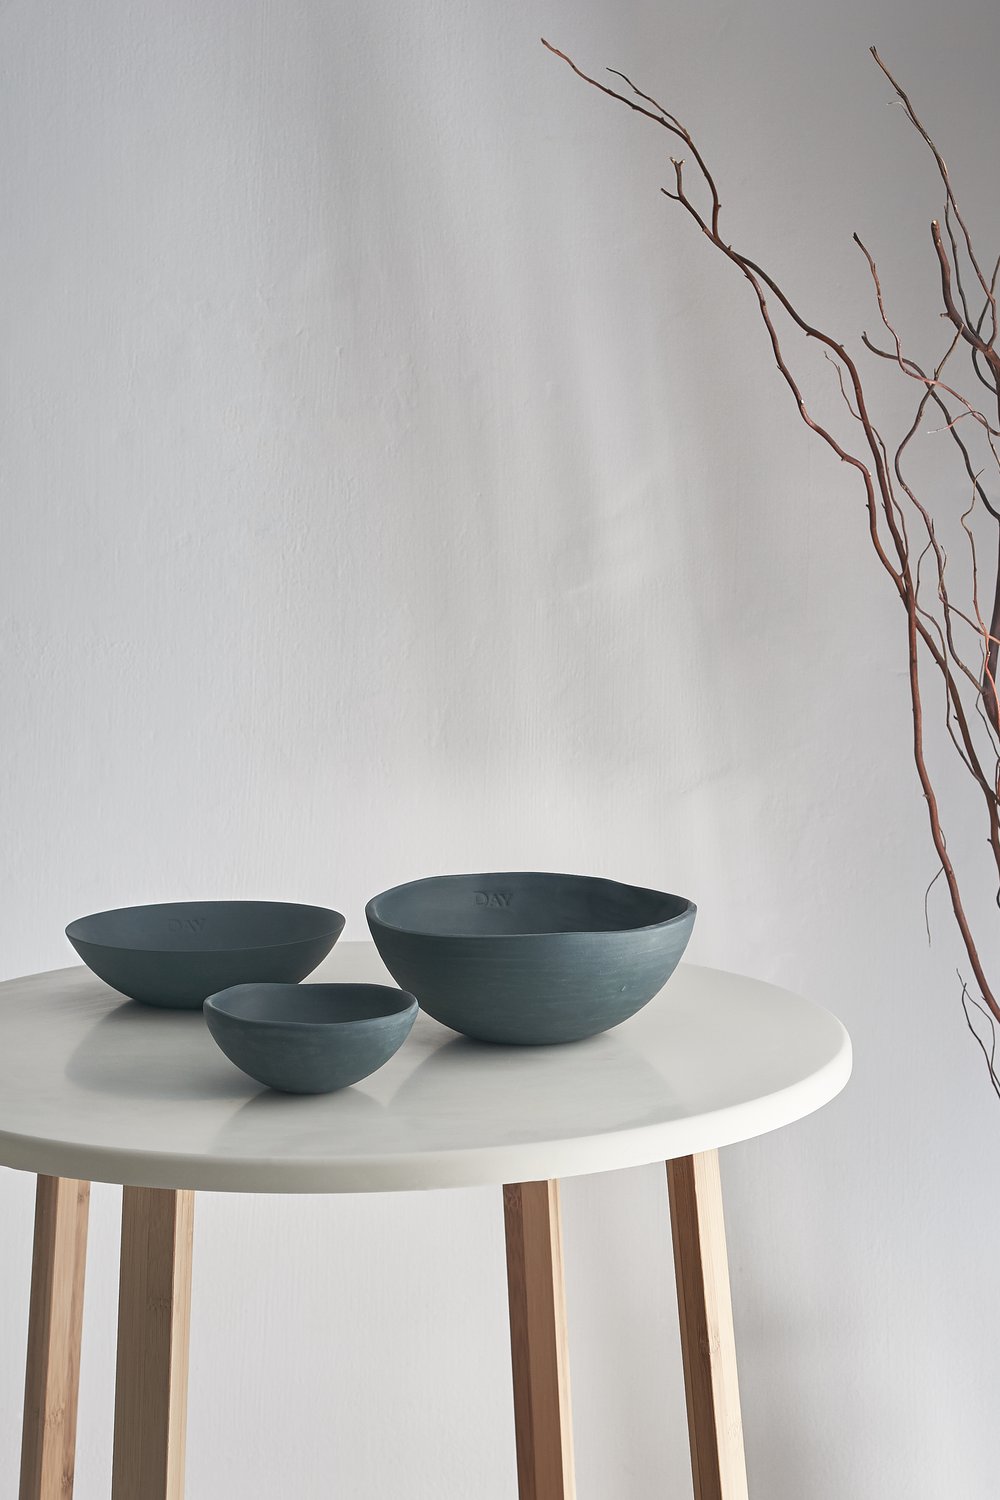  Group of three ceramicist bowls photographed in contemporary setting 